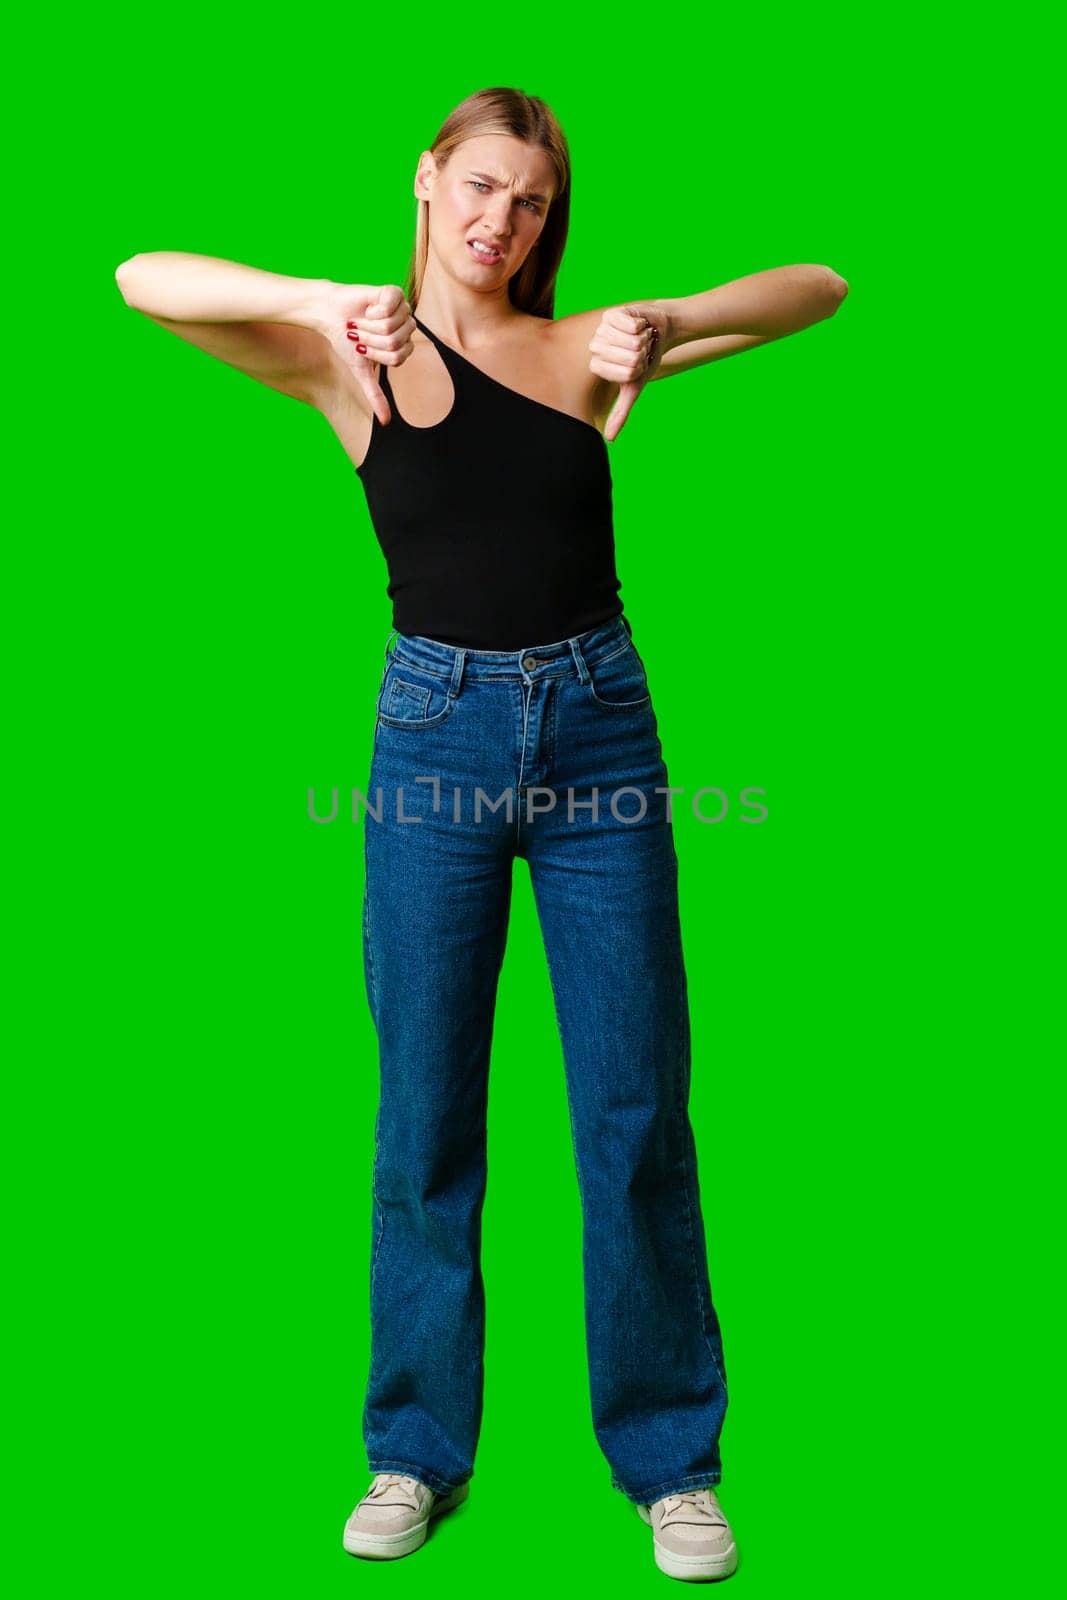 Young Woman Expressing Disapproval With a Thumbs Down Gesture Against a Green Background by Fabrikasimf